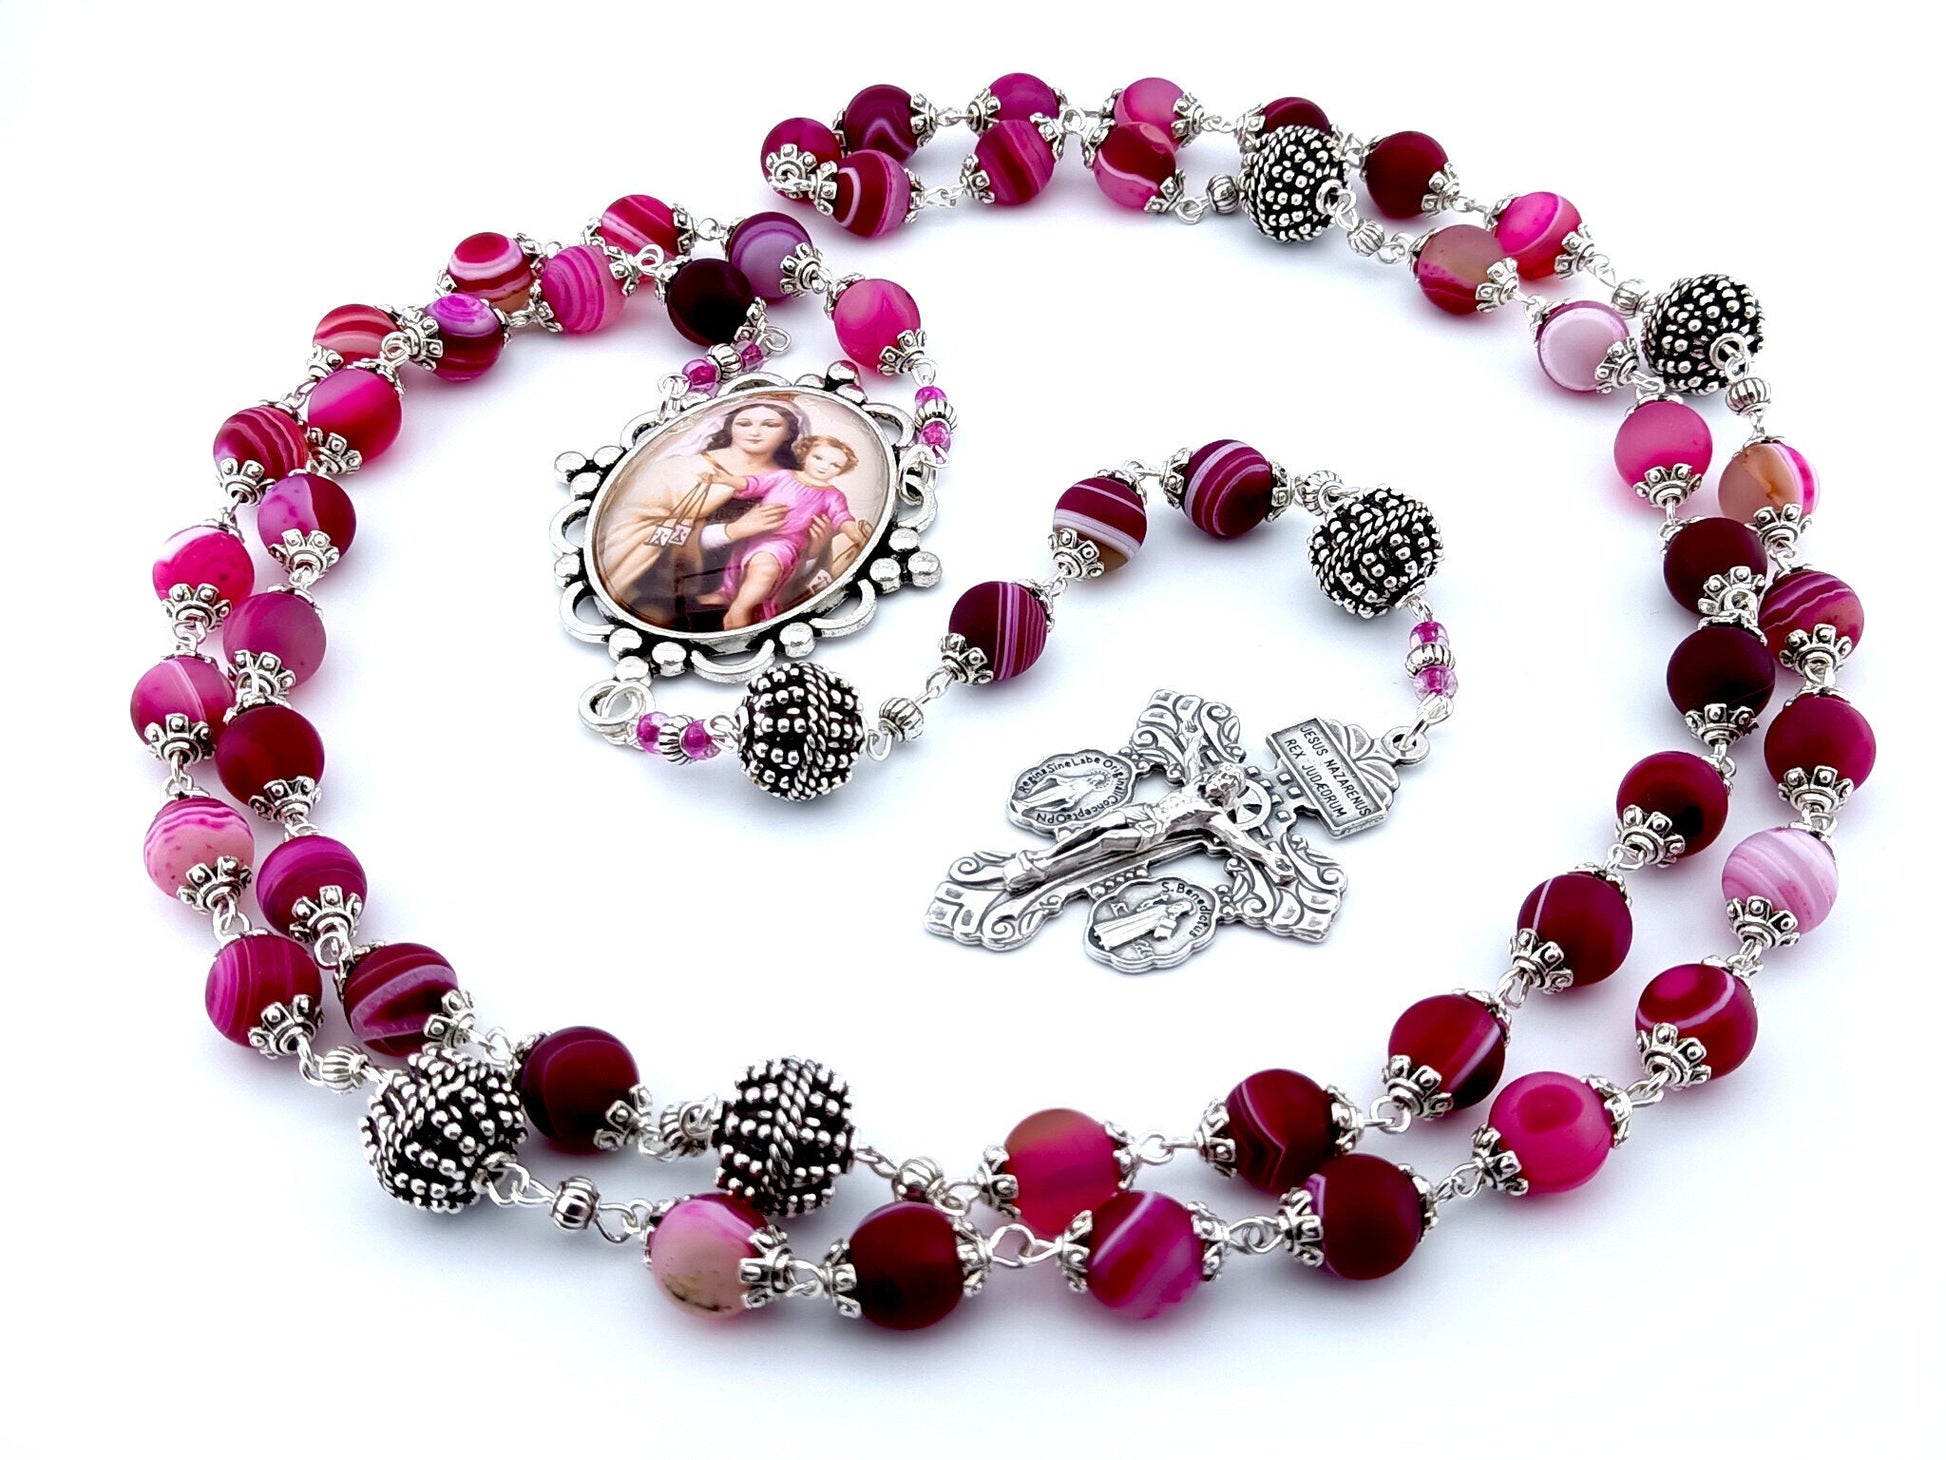 Our Lady of Mount Carmel unique rosary beads with purple agate gemstone beads, pardon crucifix, silver pater beads and picture centre medal.